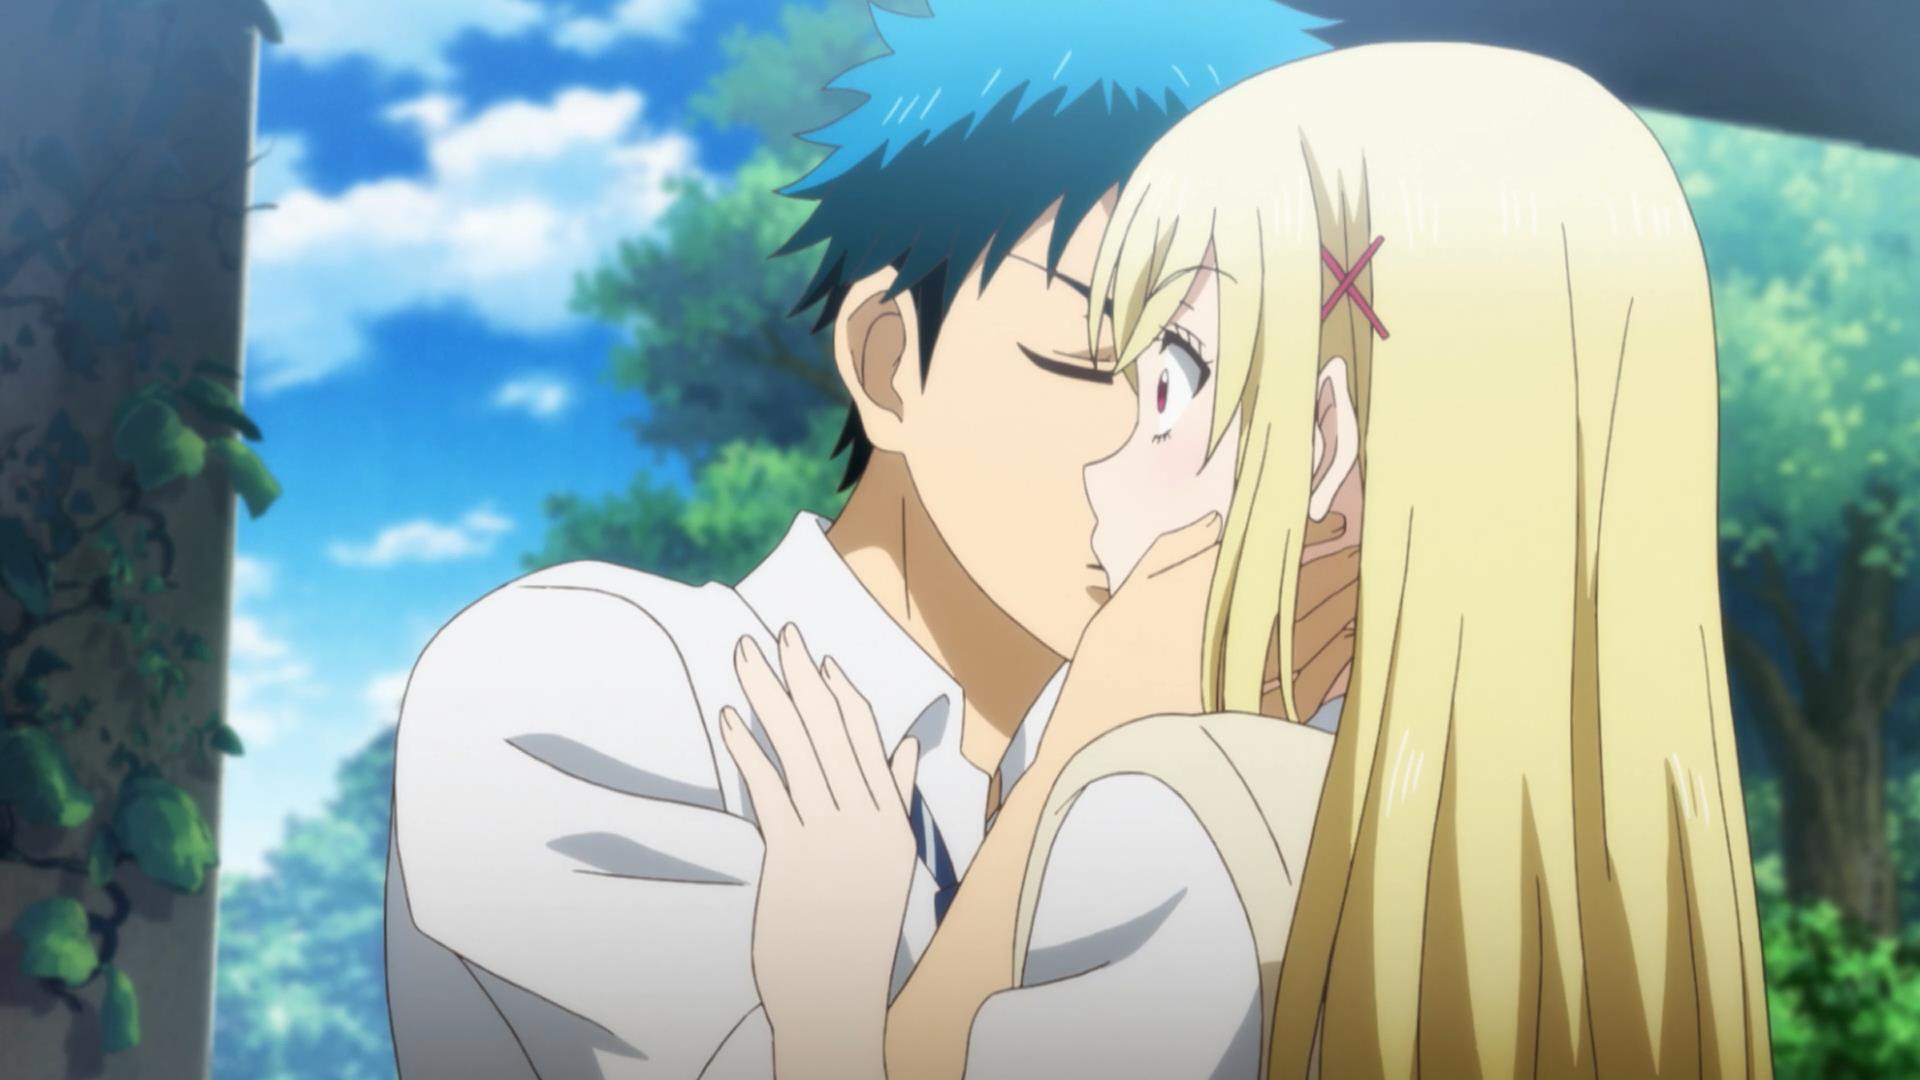 [HorribleSubs] Yamada-kun and the Seven Witches - 05 [1080p].mkv_snapshot_06.54_[2015.05.10_23.52.07]